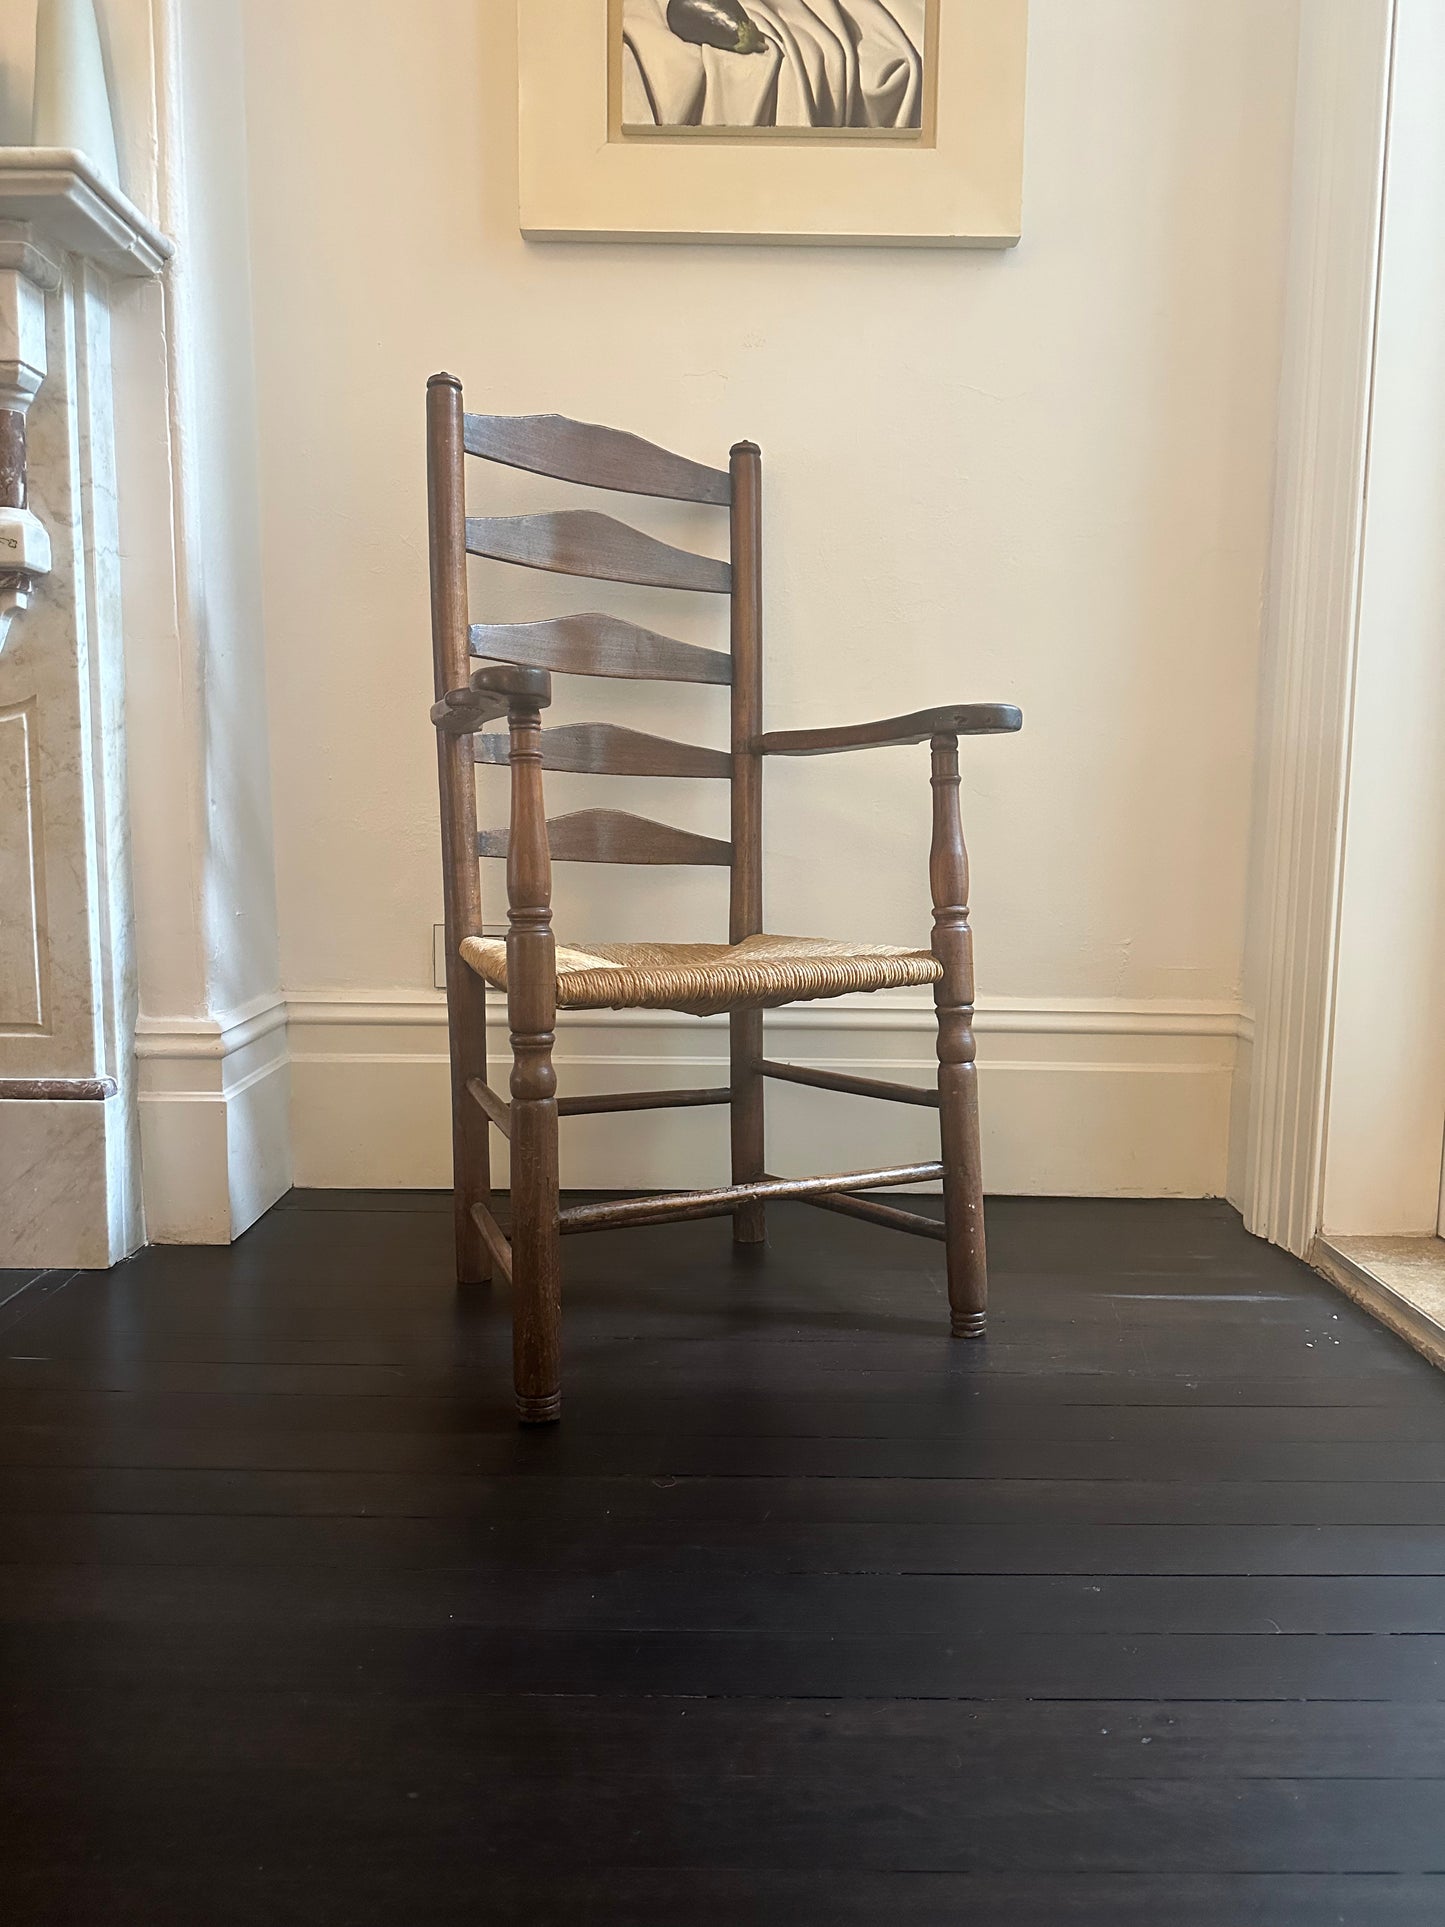 Ladder back chair with a rush seat